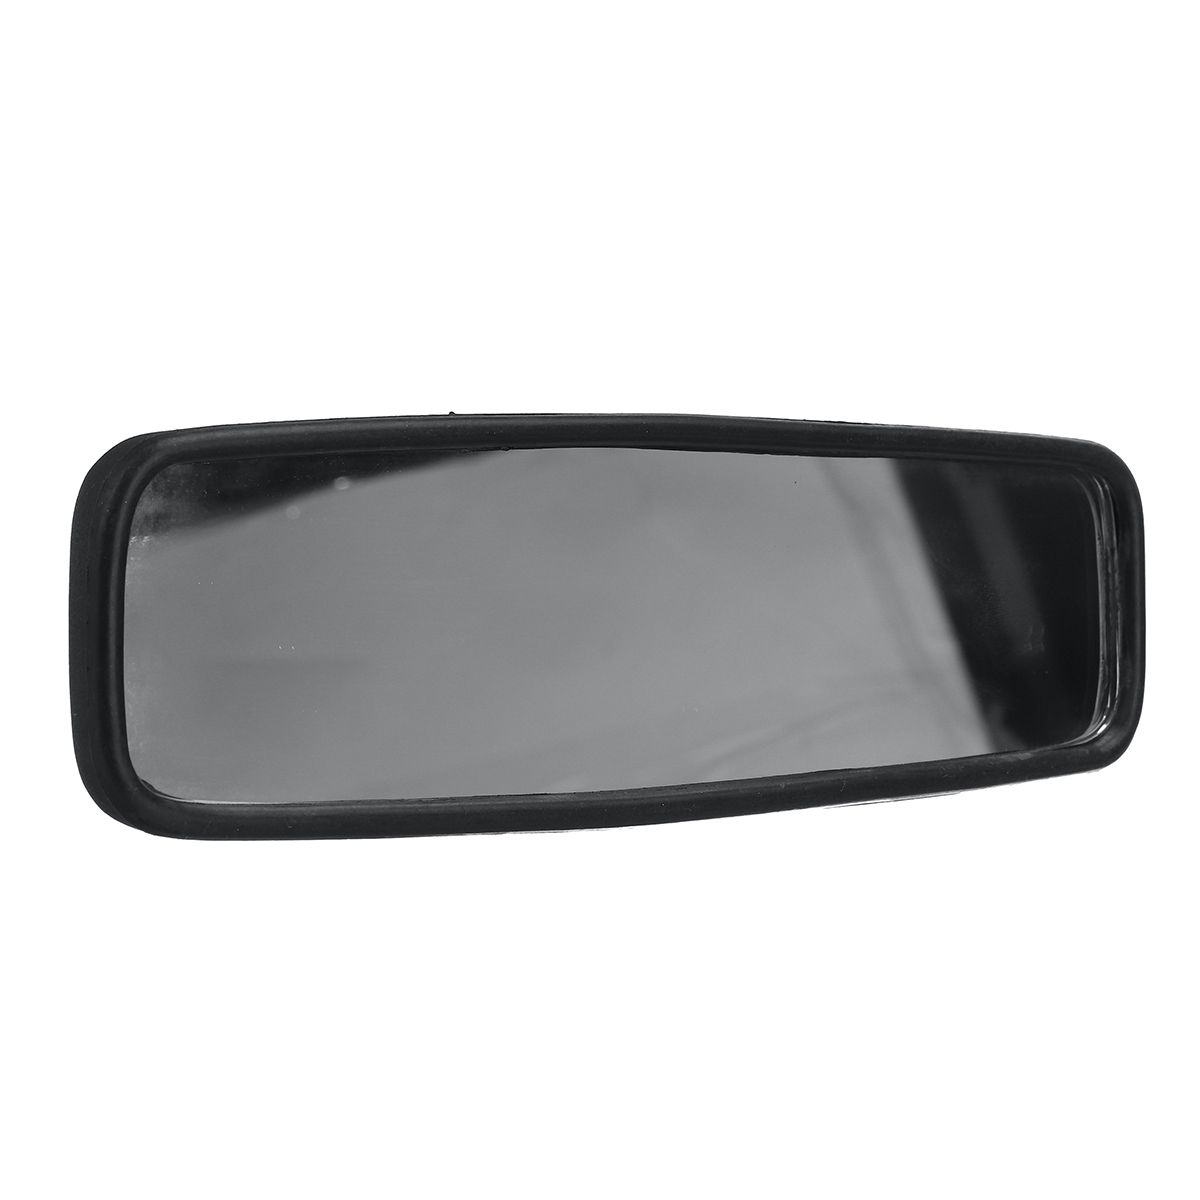 Interior Rear View Mirror Glass Car Wide Flat for Peugeot 106 205 206 306 405